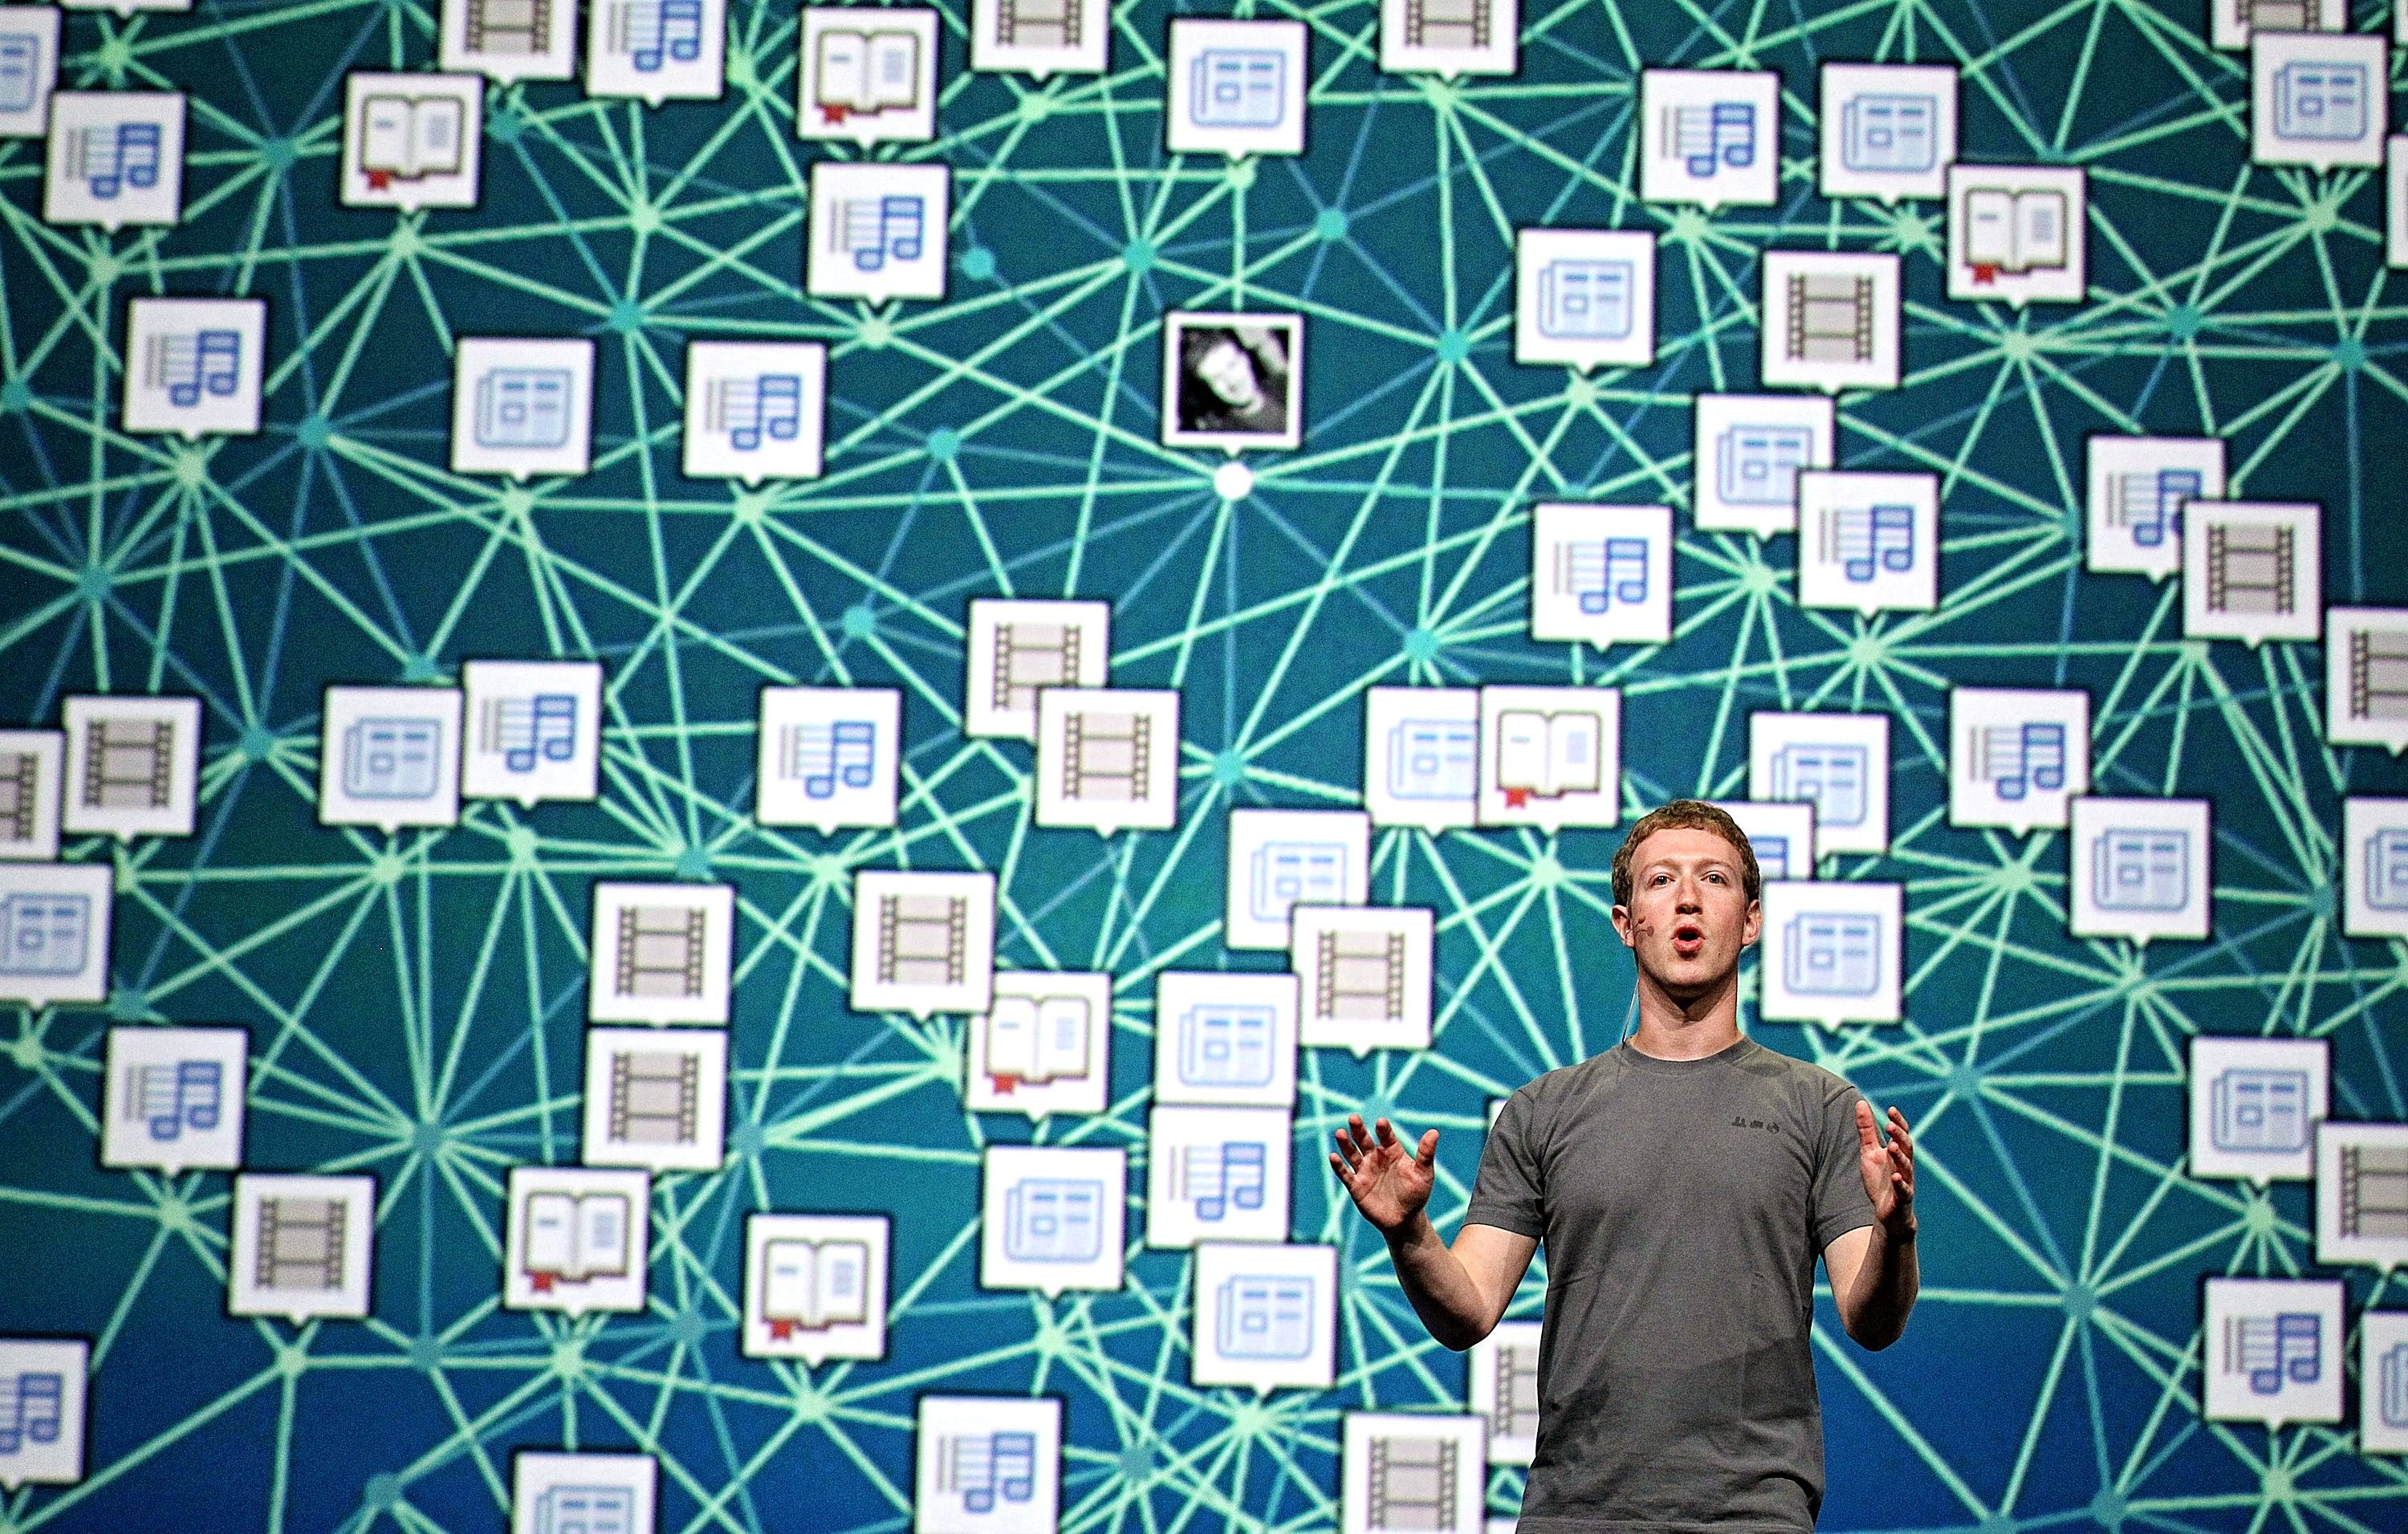 how much money facebook makes on user data